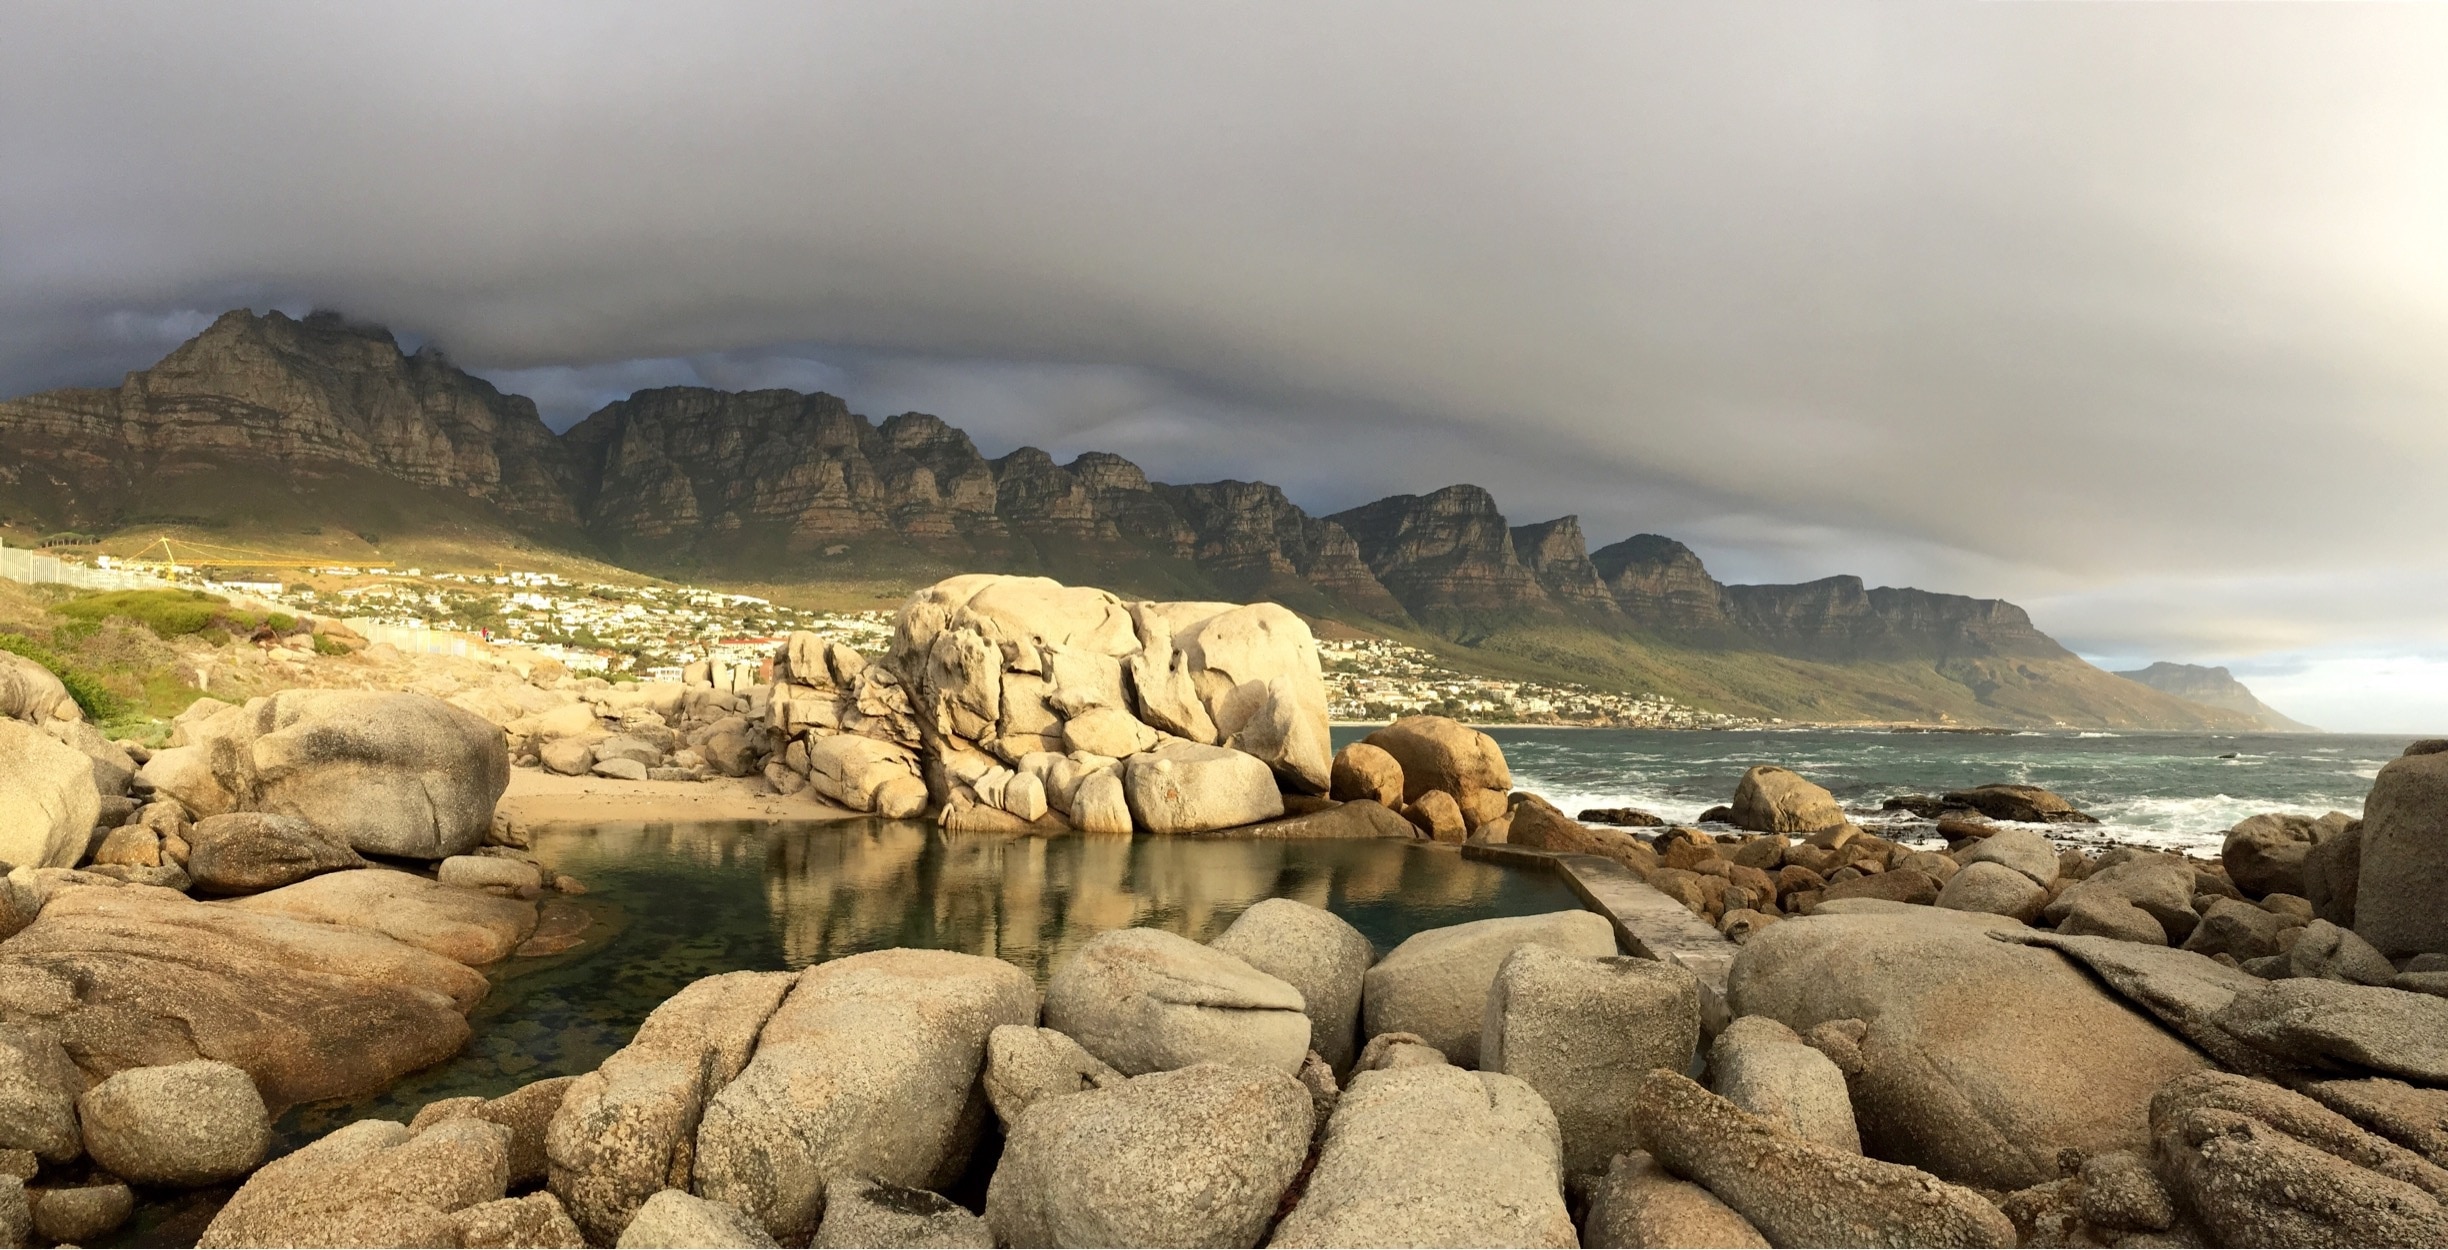 This tidal pool at the north end of Camps Bay main beach is the perfect spot to watch the sun sink while the "Table Cloth" rolls over Table Mountain National Park #GoldenHour #CampsBay #SouthAfrica #CapeTown